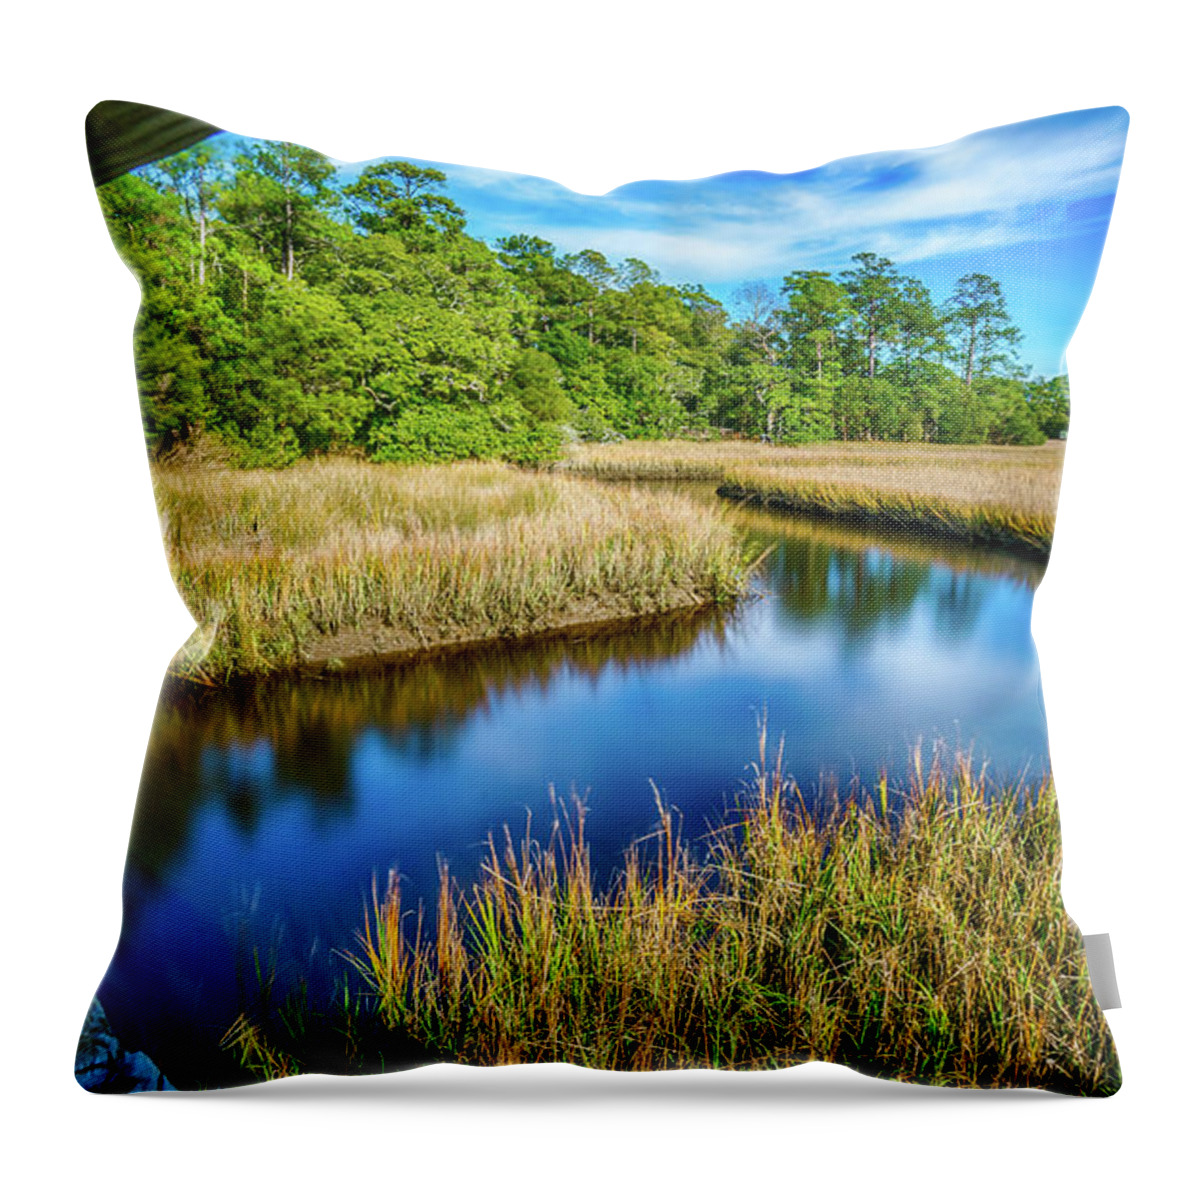 Marsh Throw Pillow featuring the photograph Canals Bend by David Smith